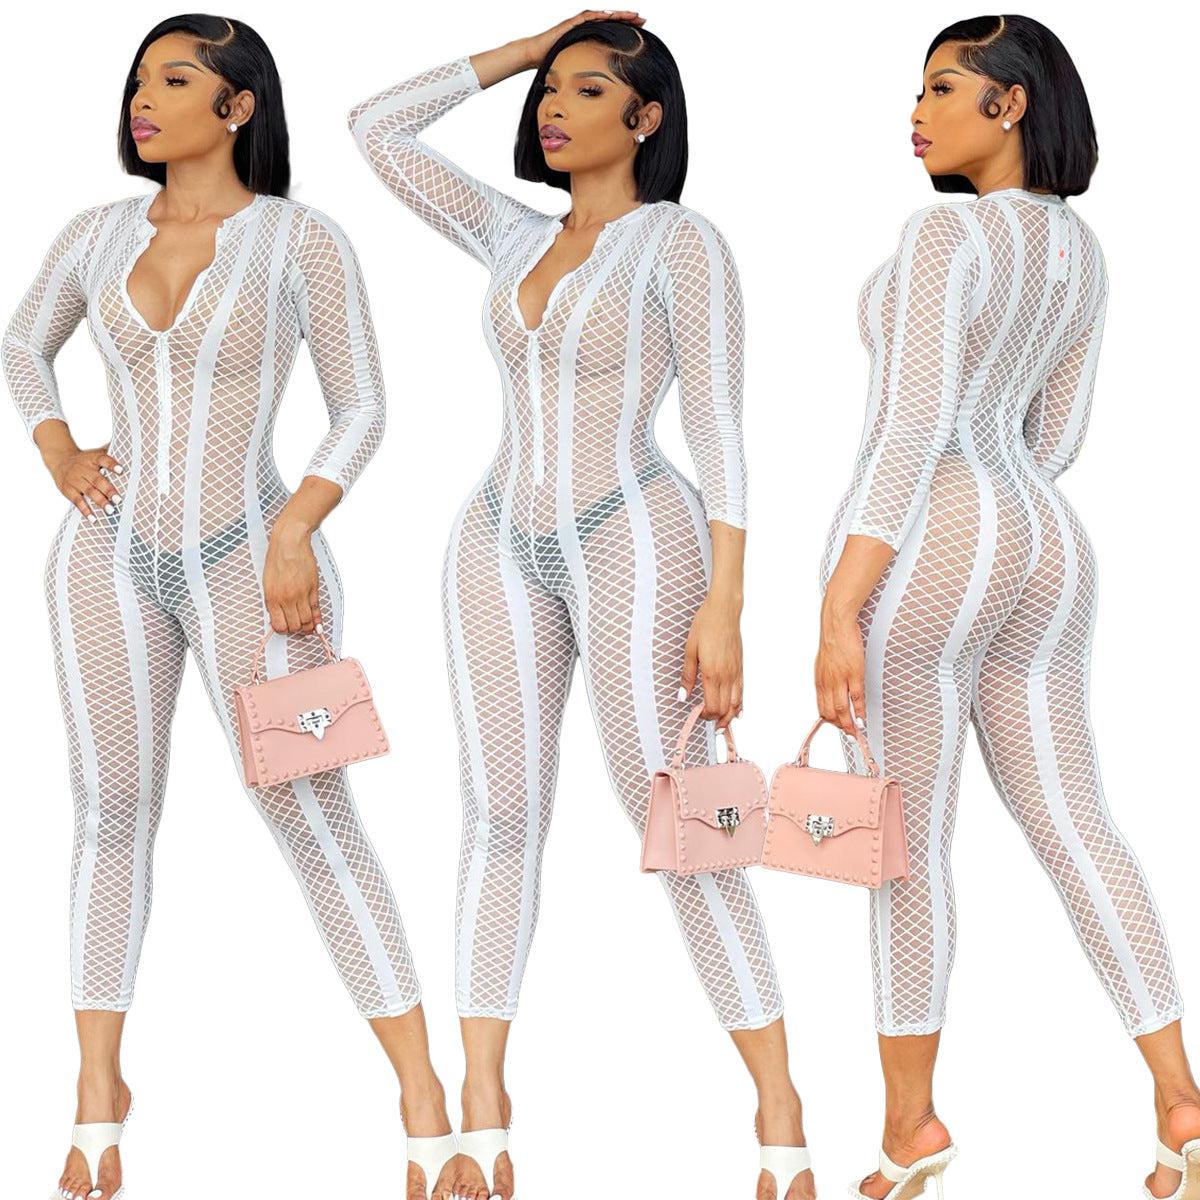 SAALS263 solid color transparent long sleeve bodycon sexy ladies long pants mesh see-through jumpsuit